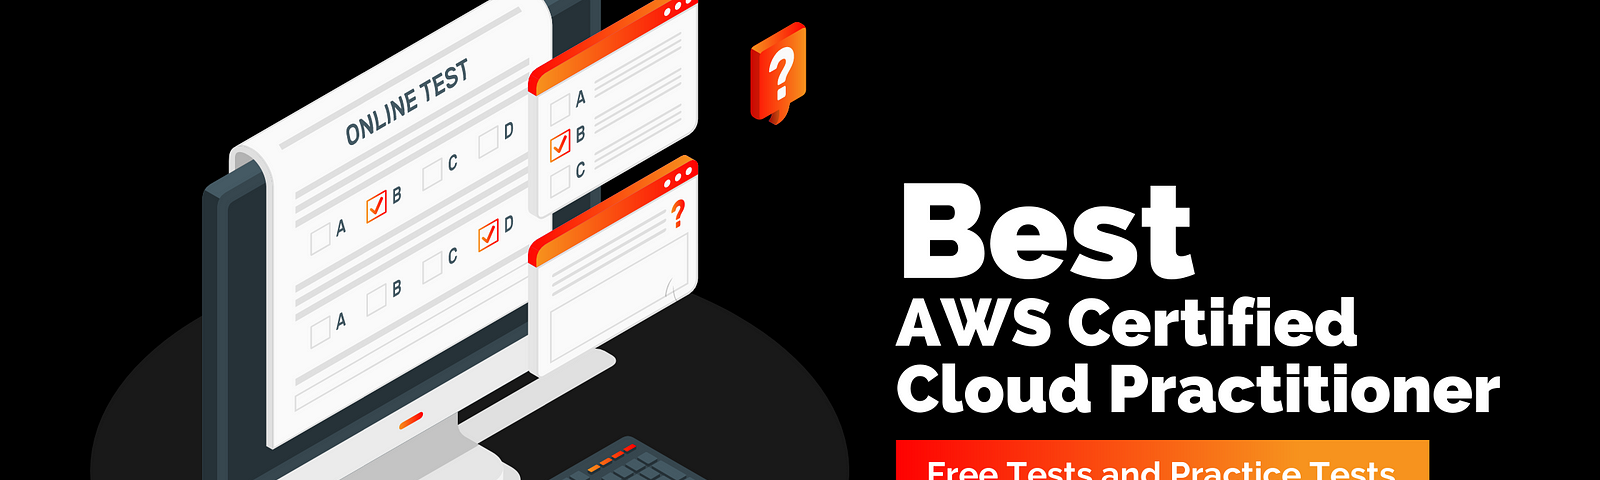 Best Free Tests and Practice Tests available for AWS Certified Cloud Practitioner Certification training